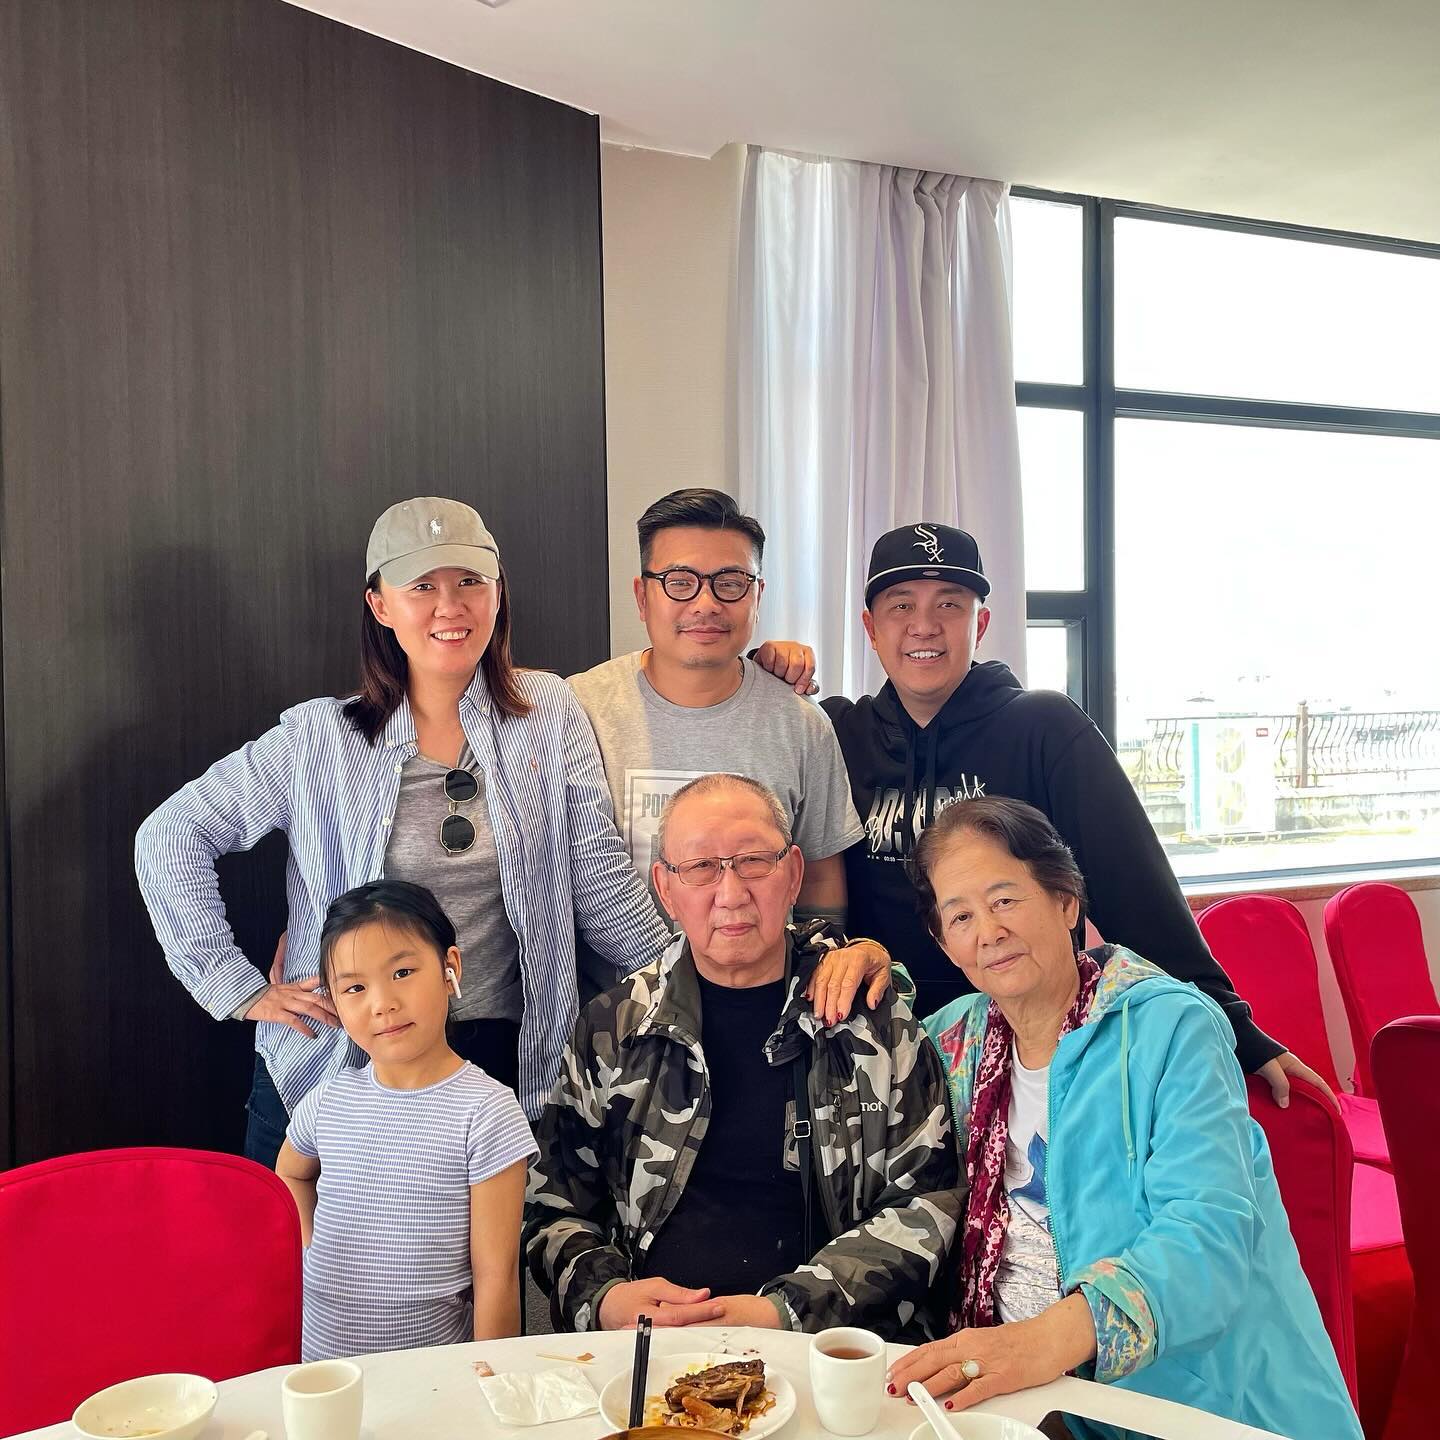 Great to see 康师傅 and his family. It’s nice of them to make a lunch stop here in this city! #CNY2024